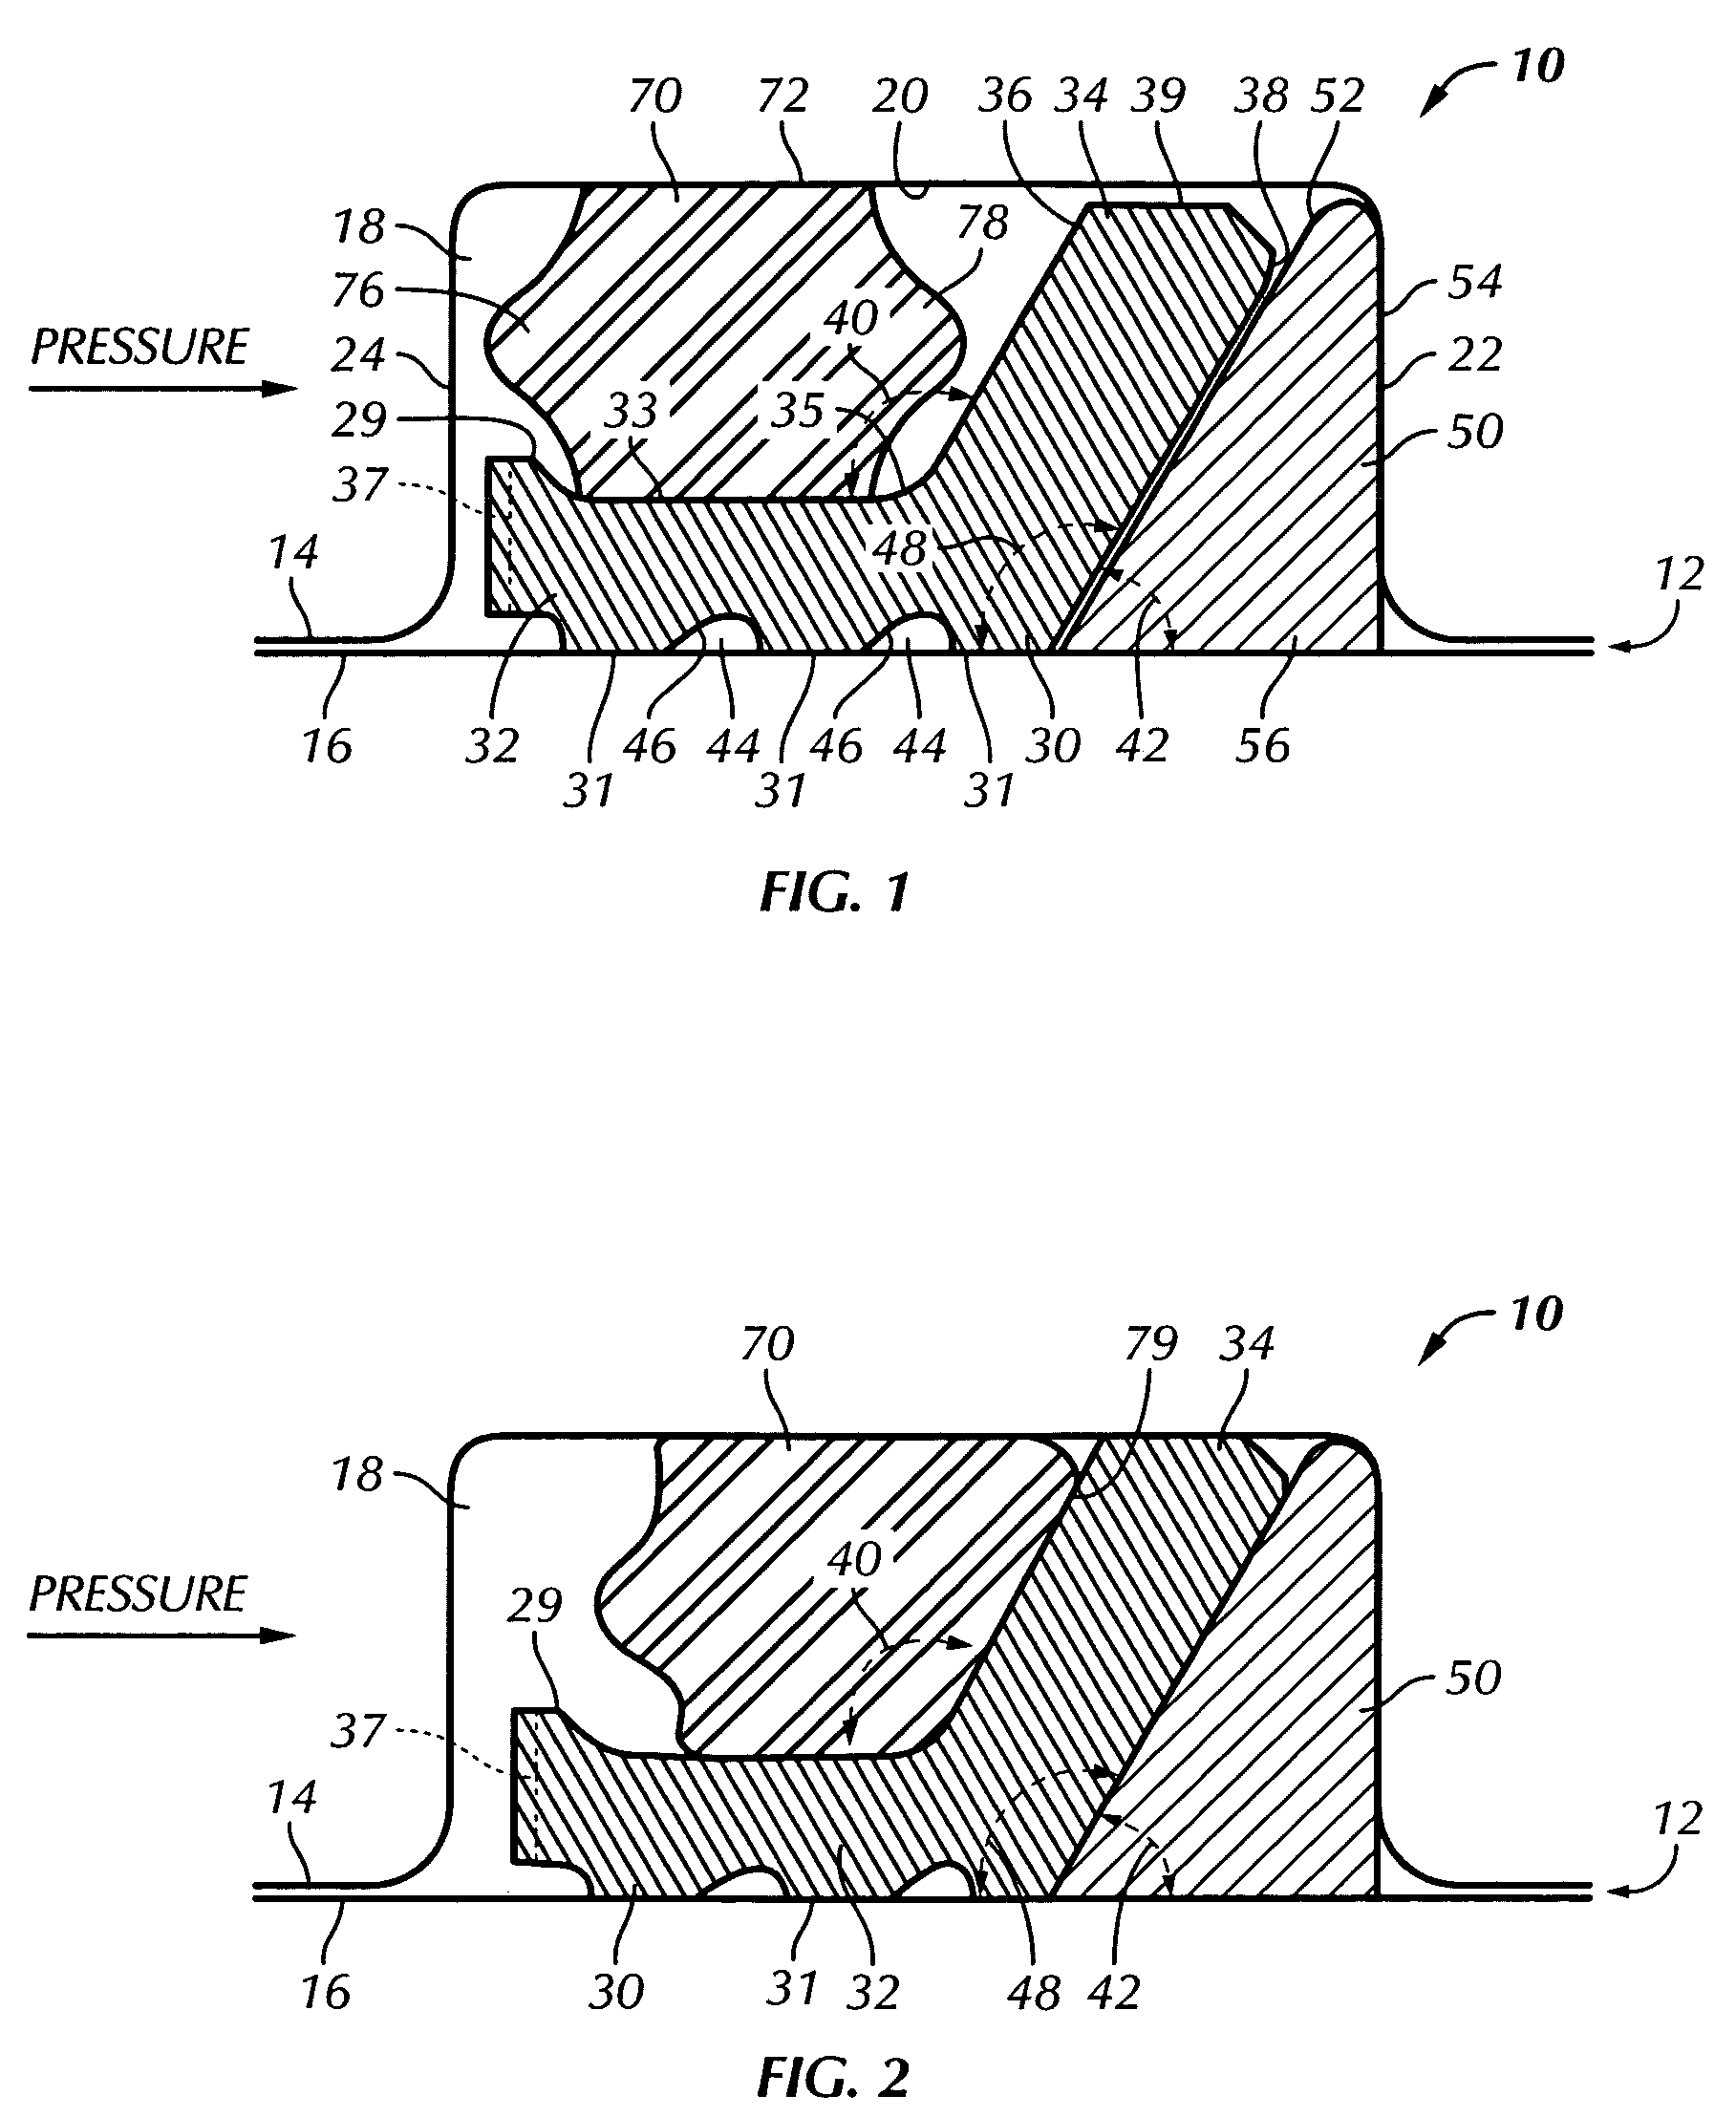 Cammed seal assembly with sealing ring having an angled leg portion and foot portion with elastomeric energizer element